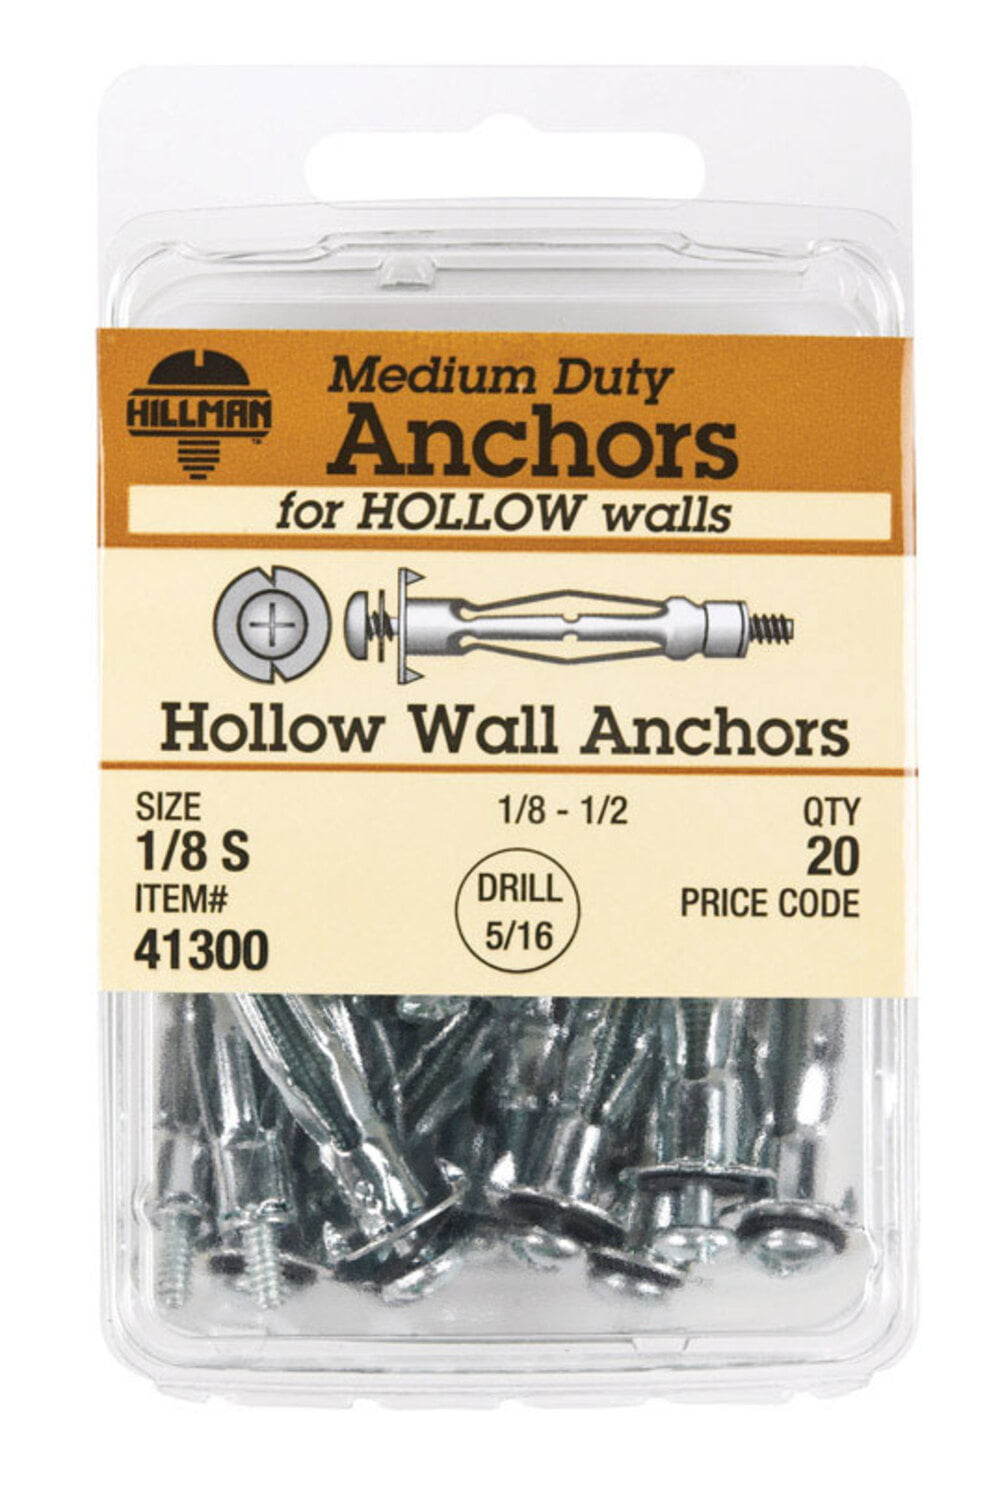 Plastic Drywall Wall Anchor Screws Assortment Kit with Hollow-Wall Anchors with Self Tapping Screws Plastic Self Drilling 60 pcs 6# 1-1/8 8# 1-1/2